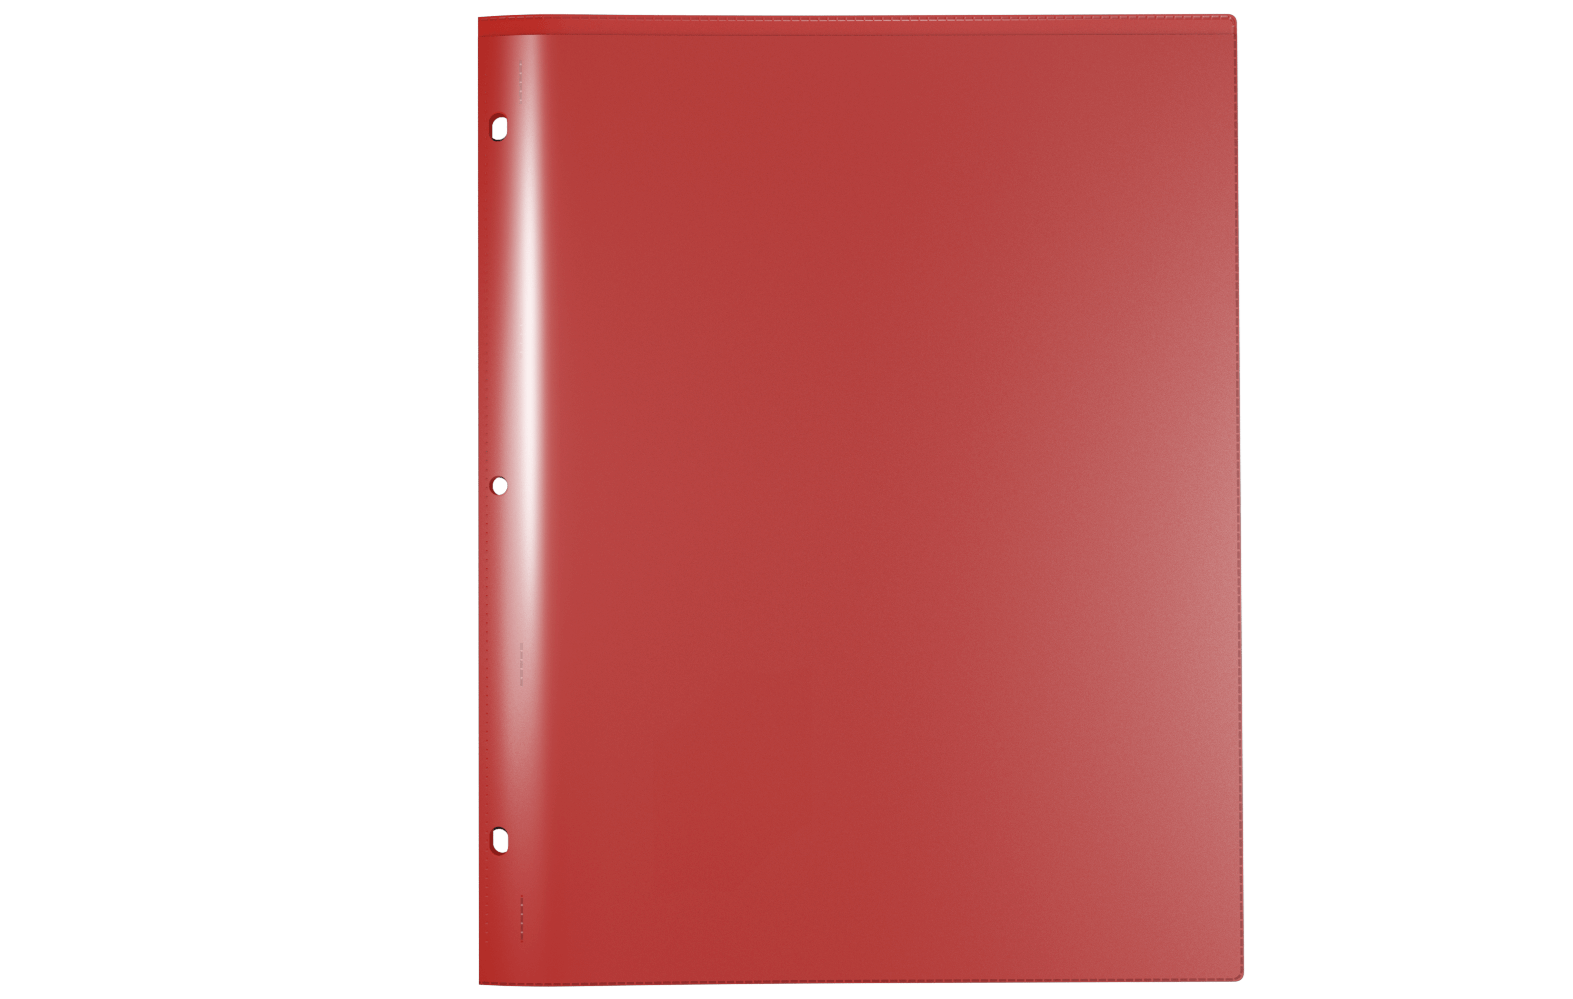 Front view of Nicky's 8 Multi Pocket Sleeves Folder used for presentation.